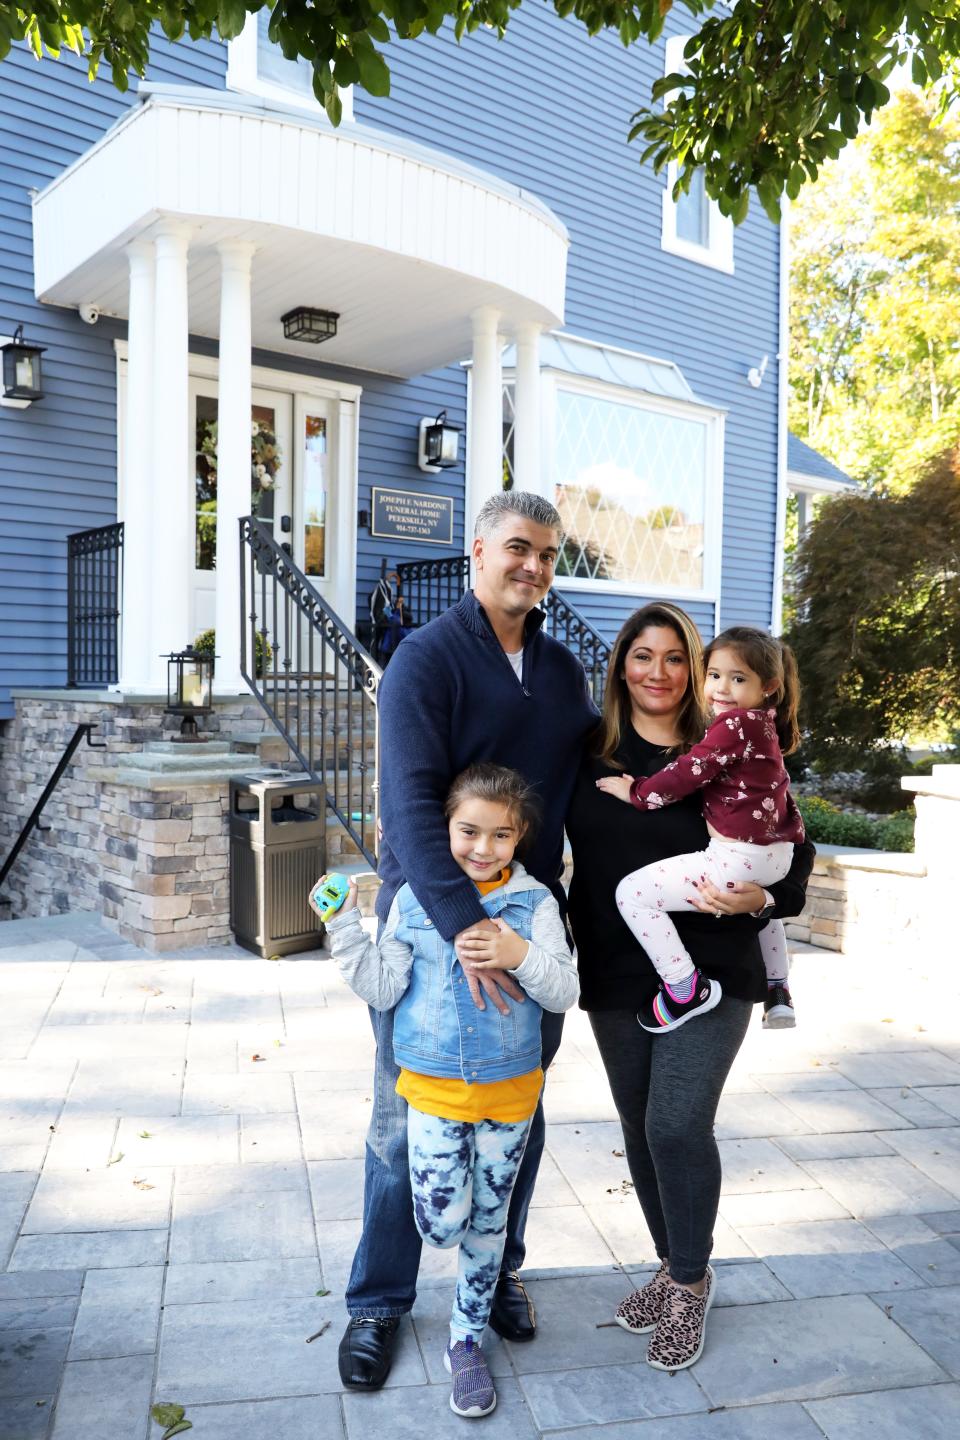 Jason and Leslie Chiaramonte with daughters Brooklyn, 6, and Phoenix, 3, outside the Joseph F. Nardone Funeral Home in Peekskill, where Mr. Chiaramonte is the funeral director, Oct. 9, 2020.